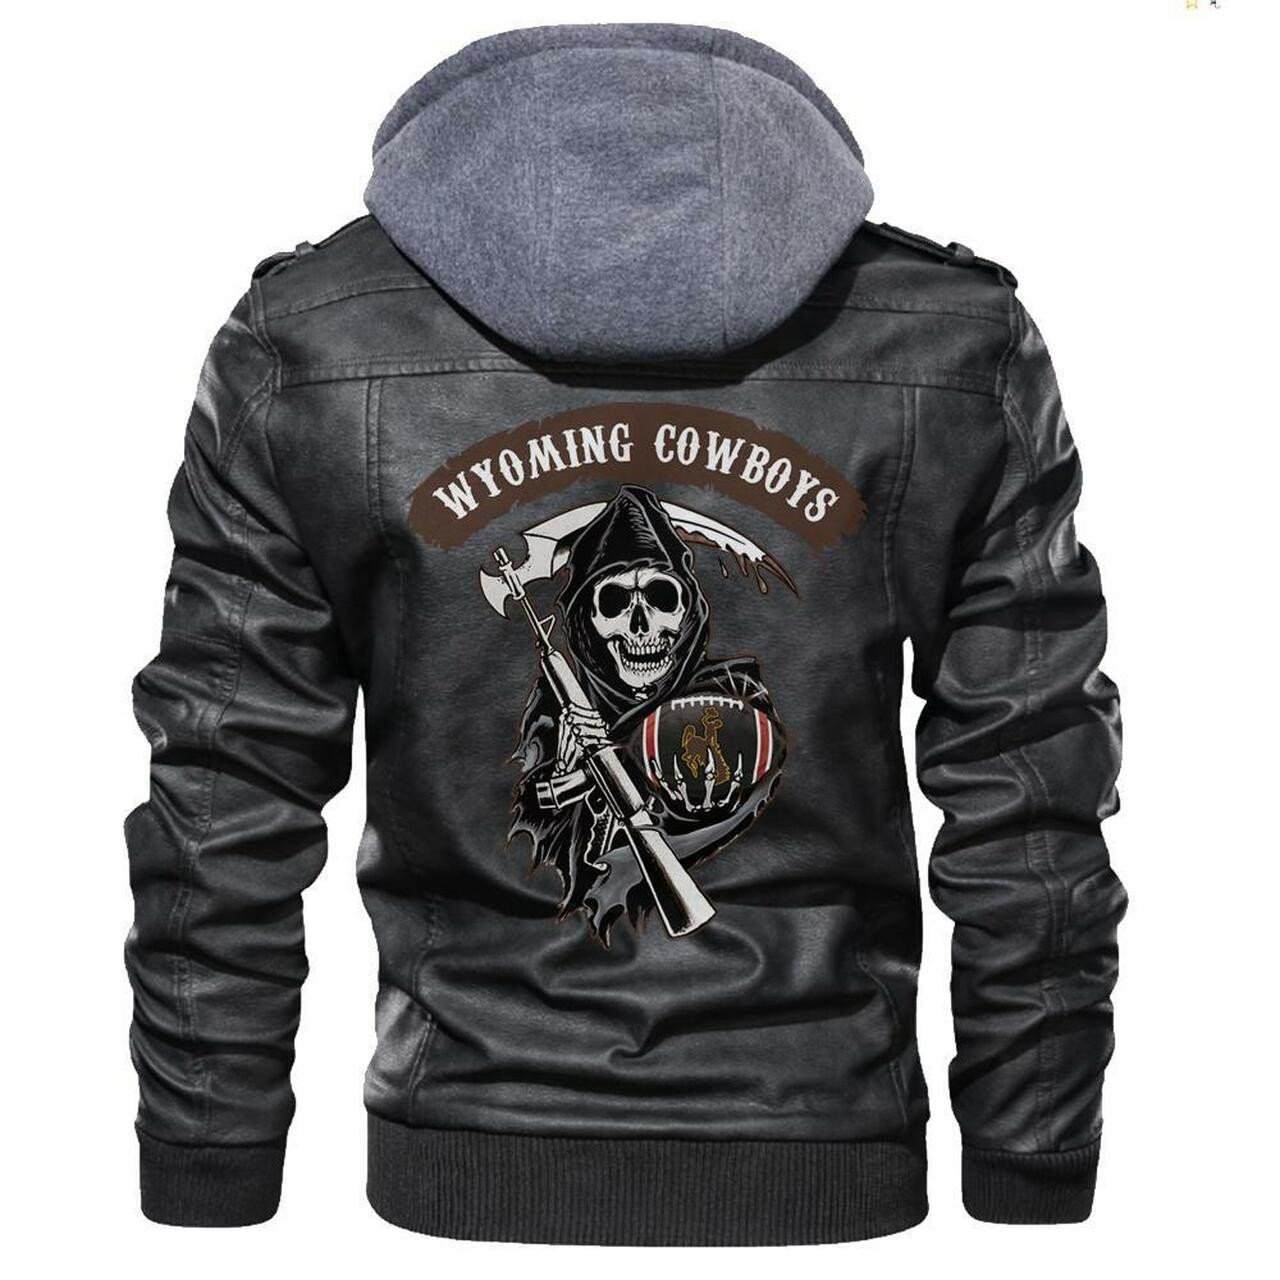 Are you looking for a great leather jacket? 137